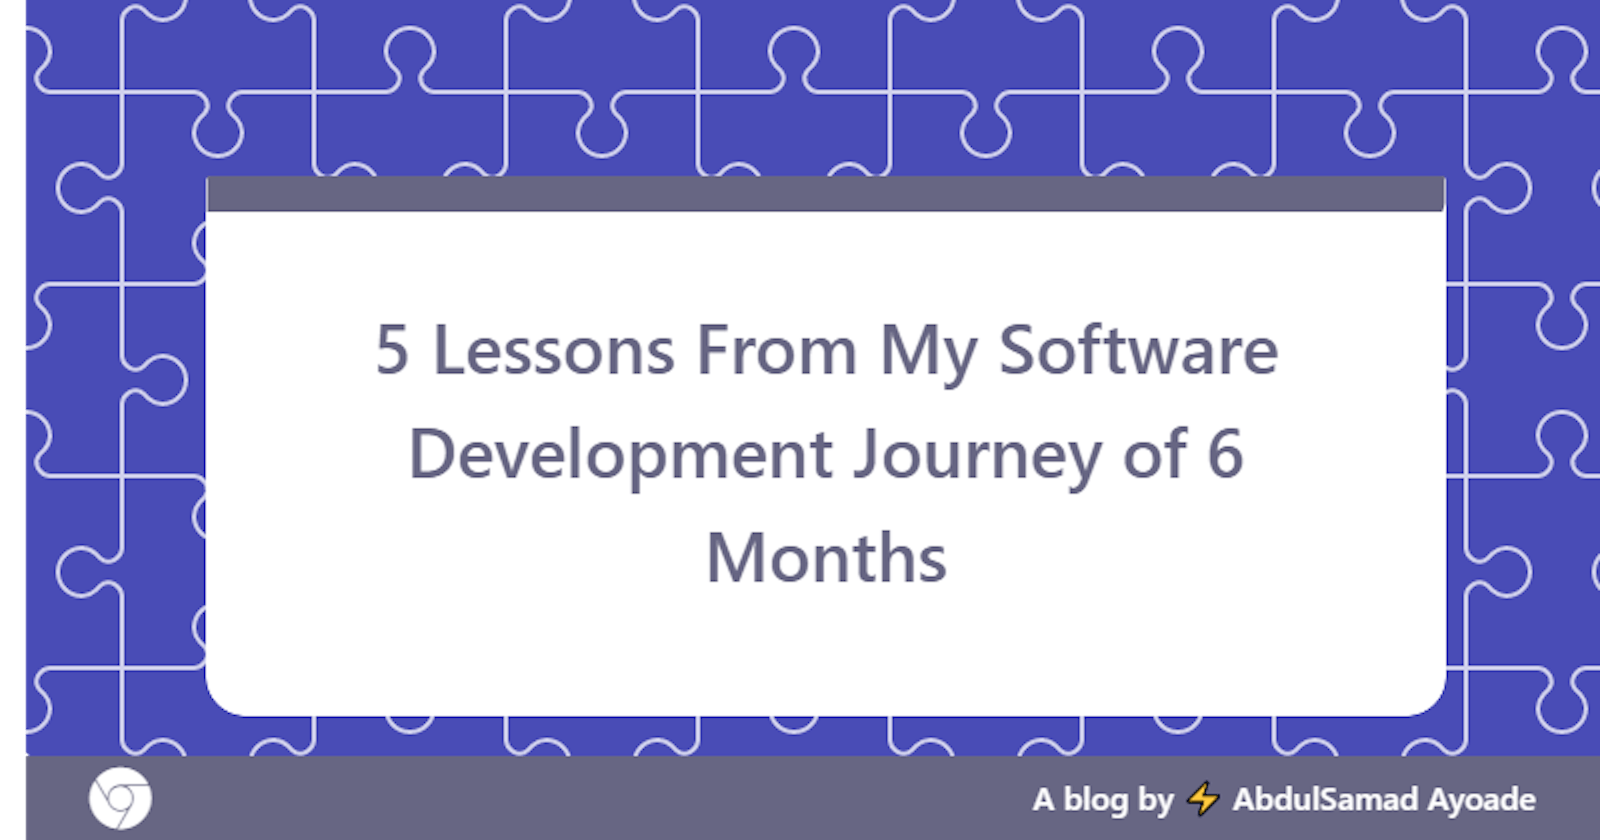 5 Lessons From My Software Development Journey of 6 Months